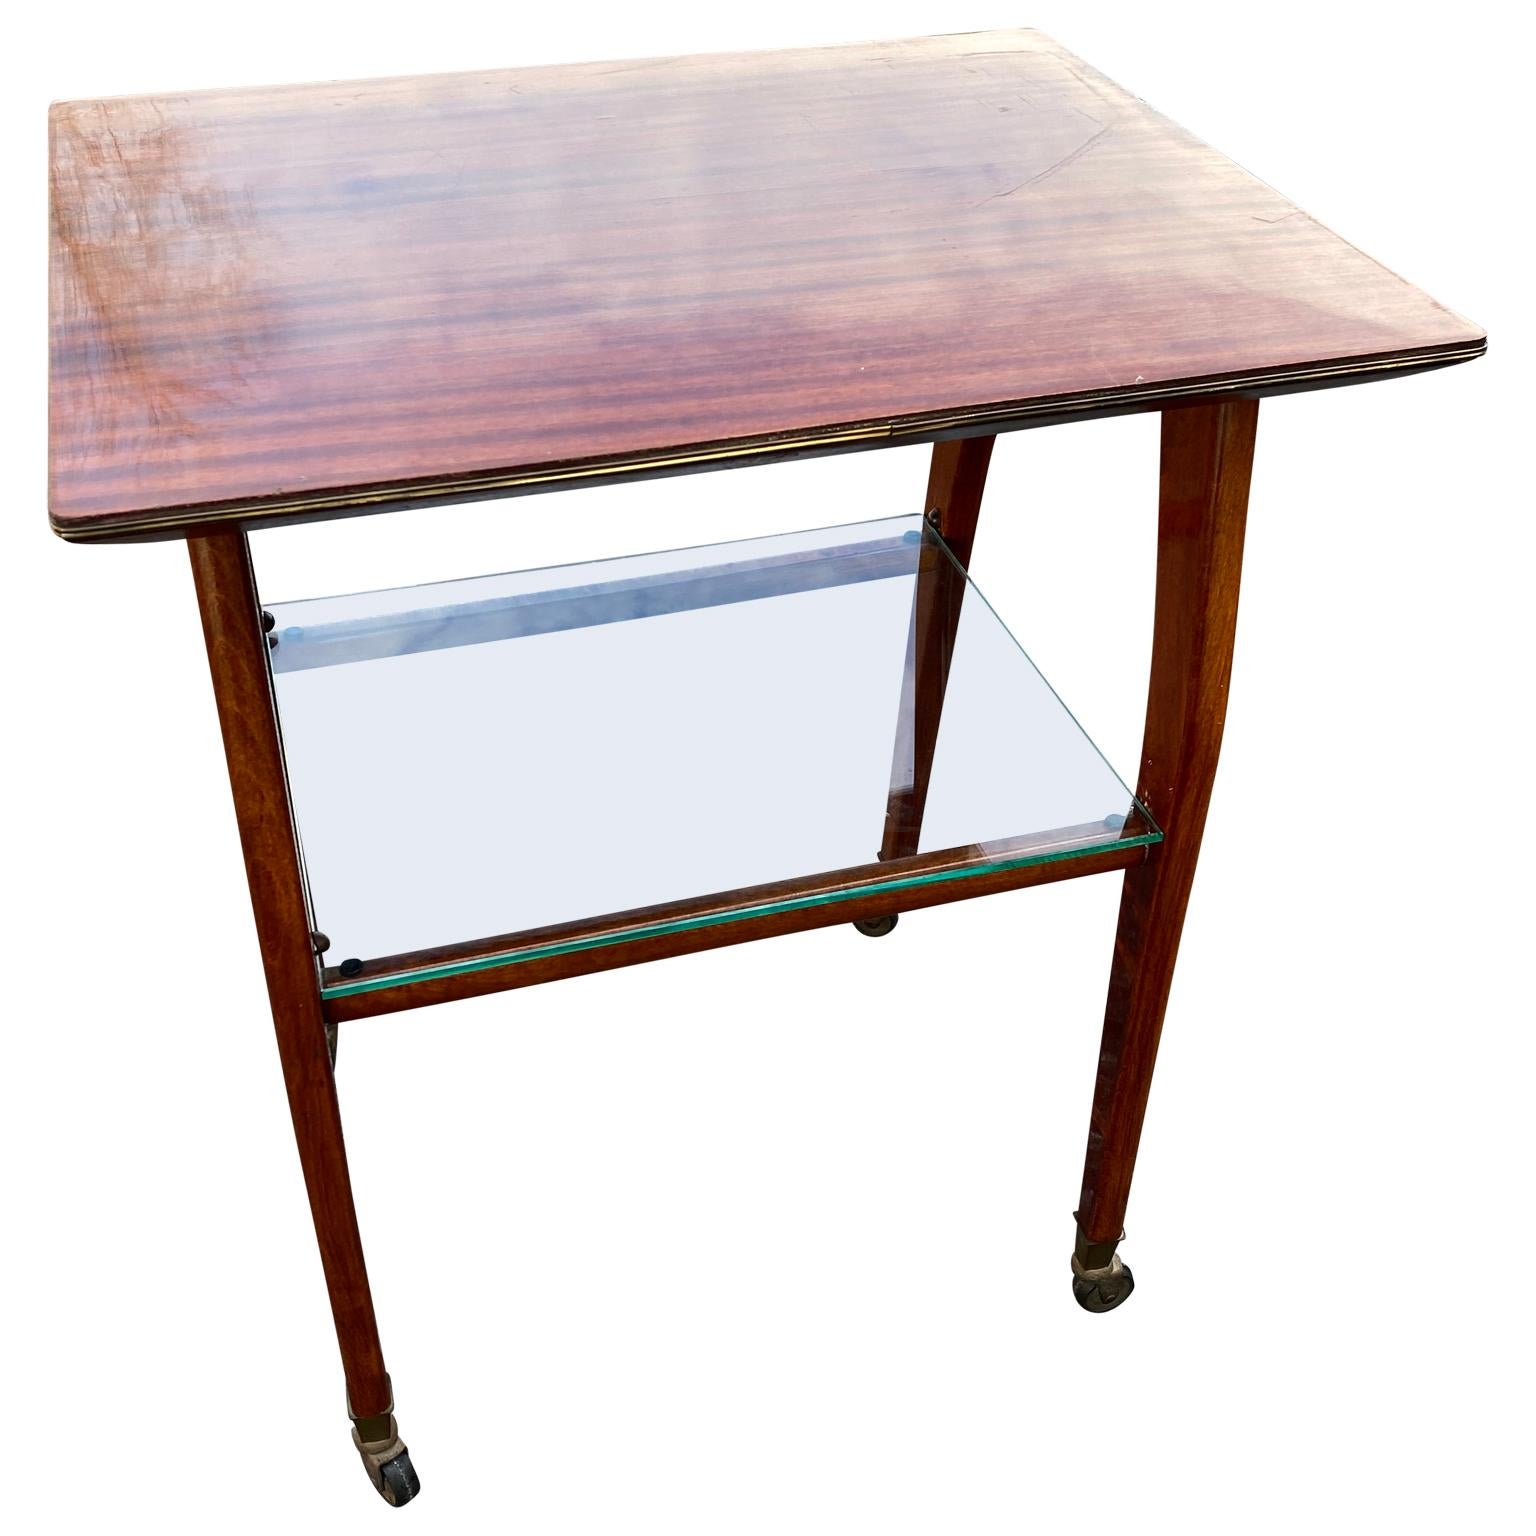 20th Century Early Italian Mid-Century Modern Two-Tier Bar Trolley With Glass Shelf For Sale